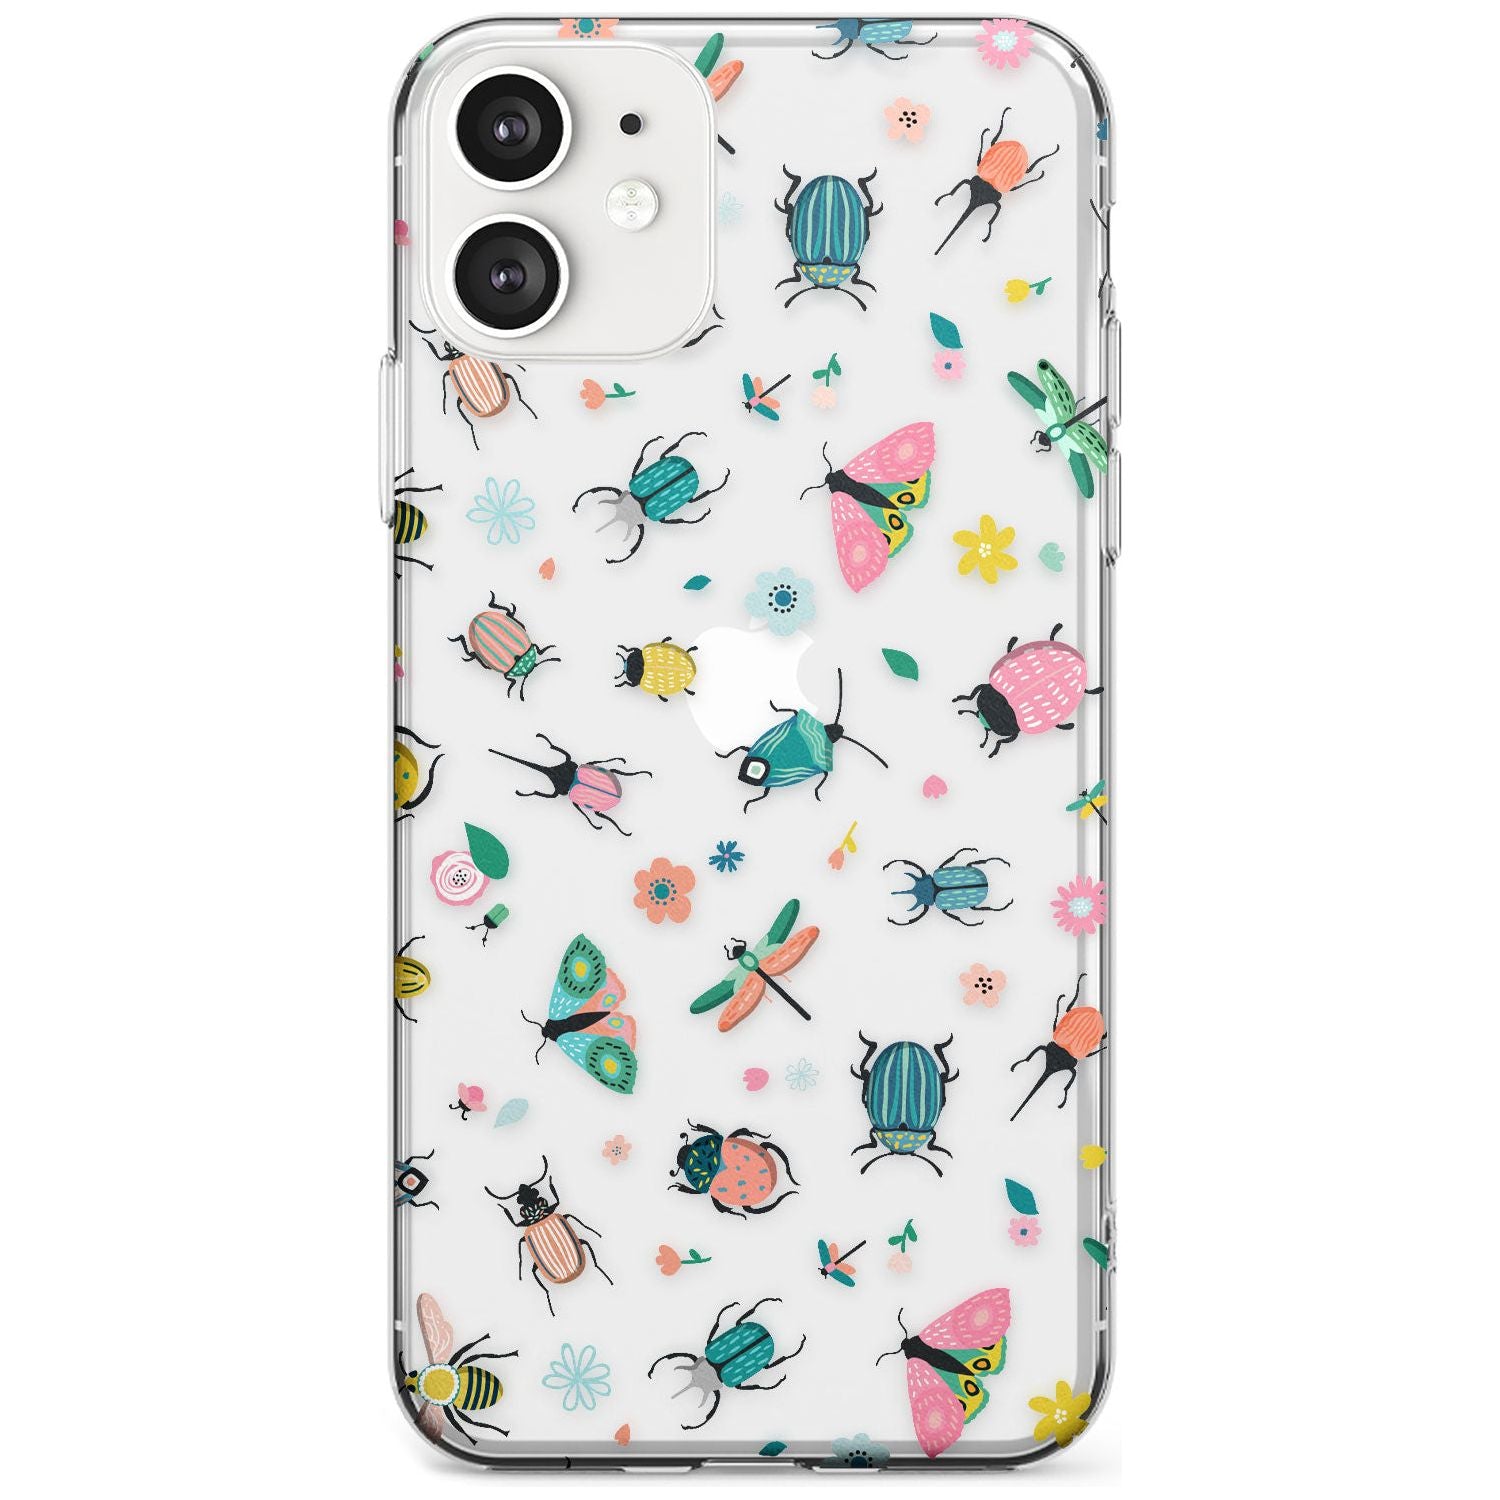 Spring Insects Black Impact Phone Case for iPhone 11